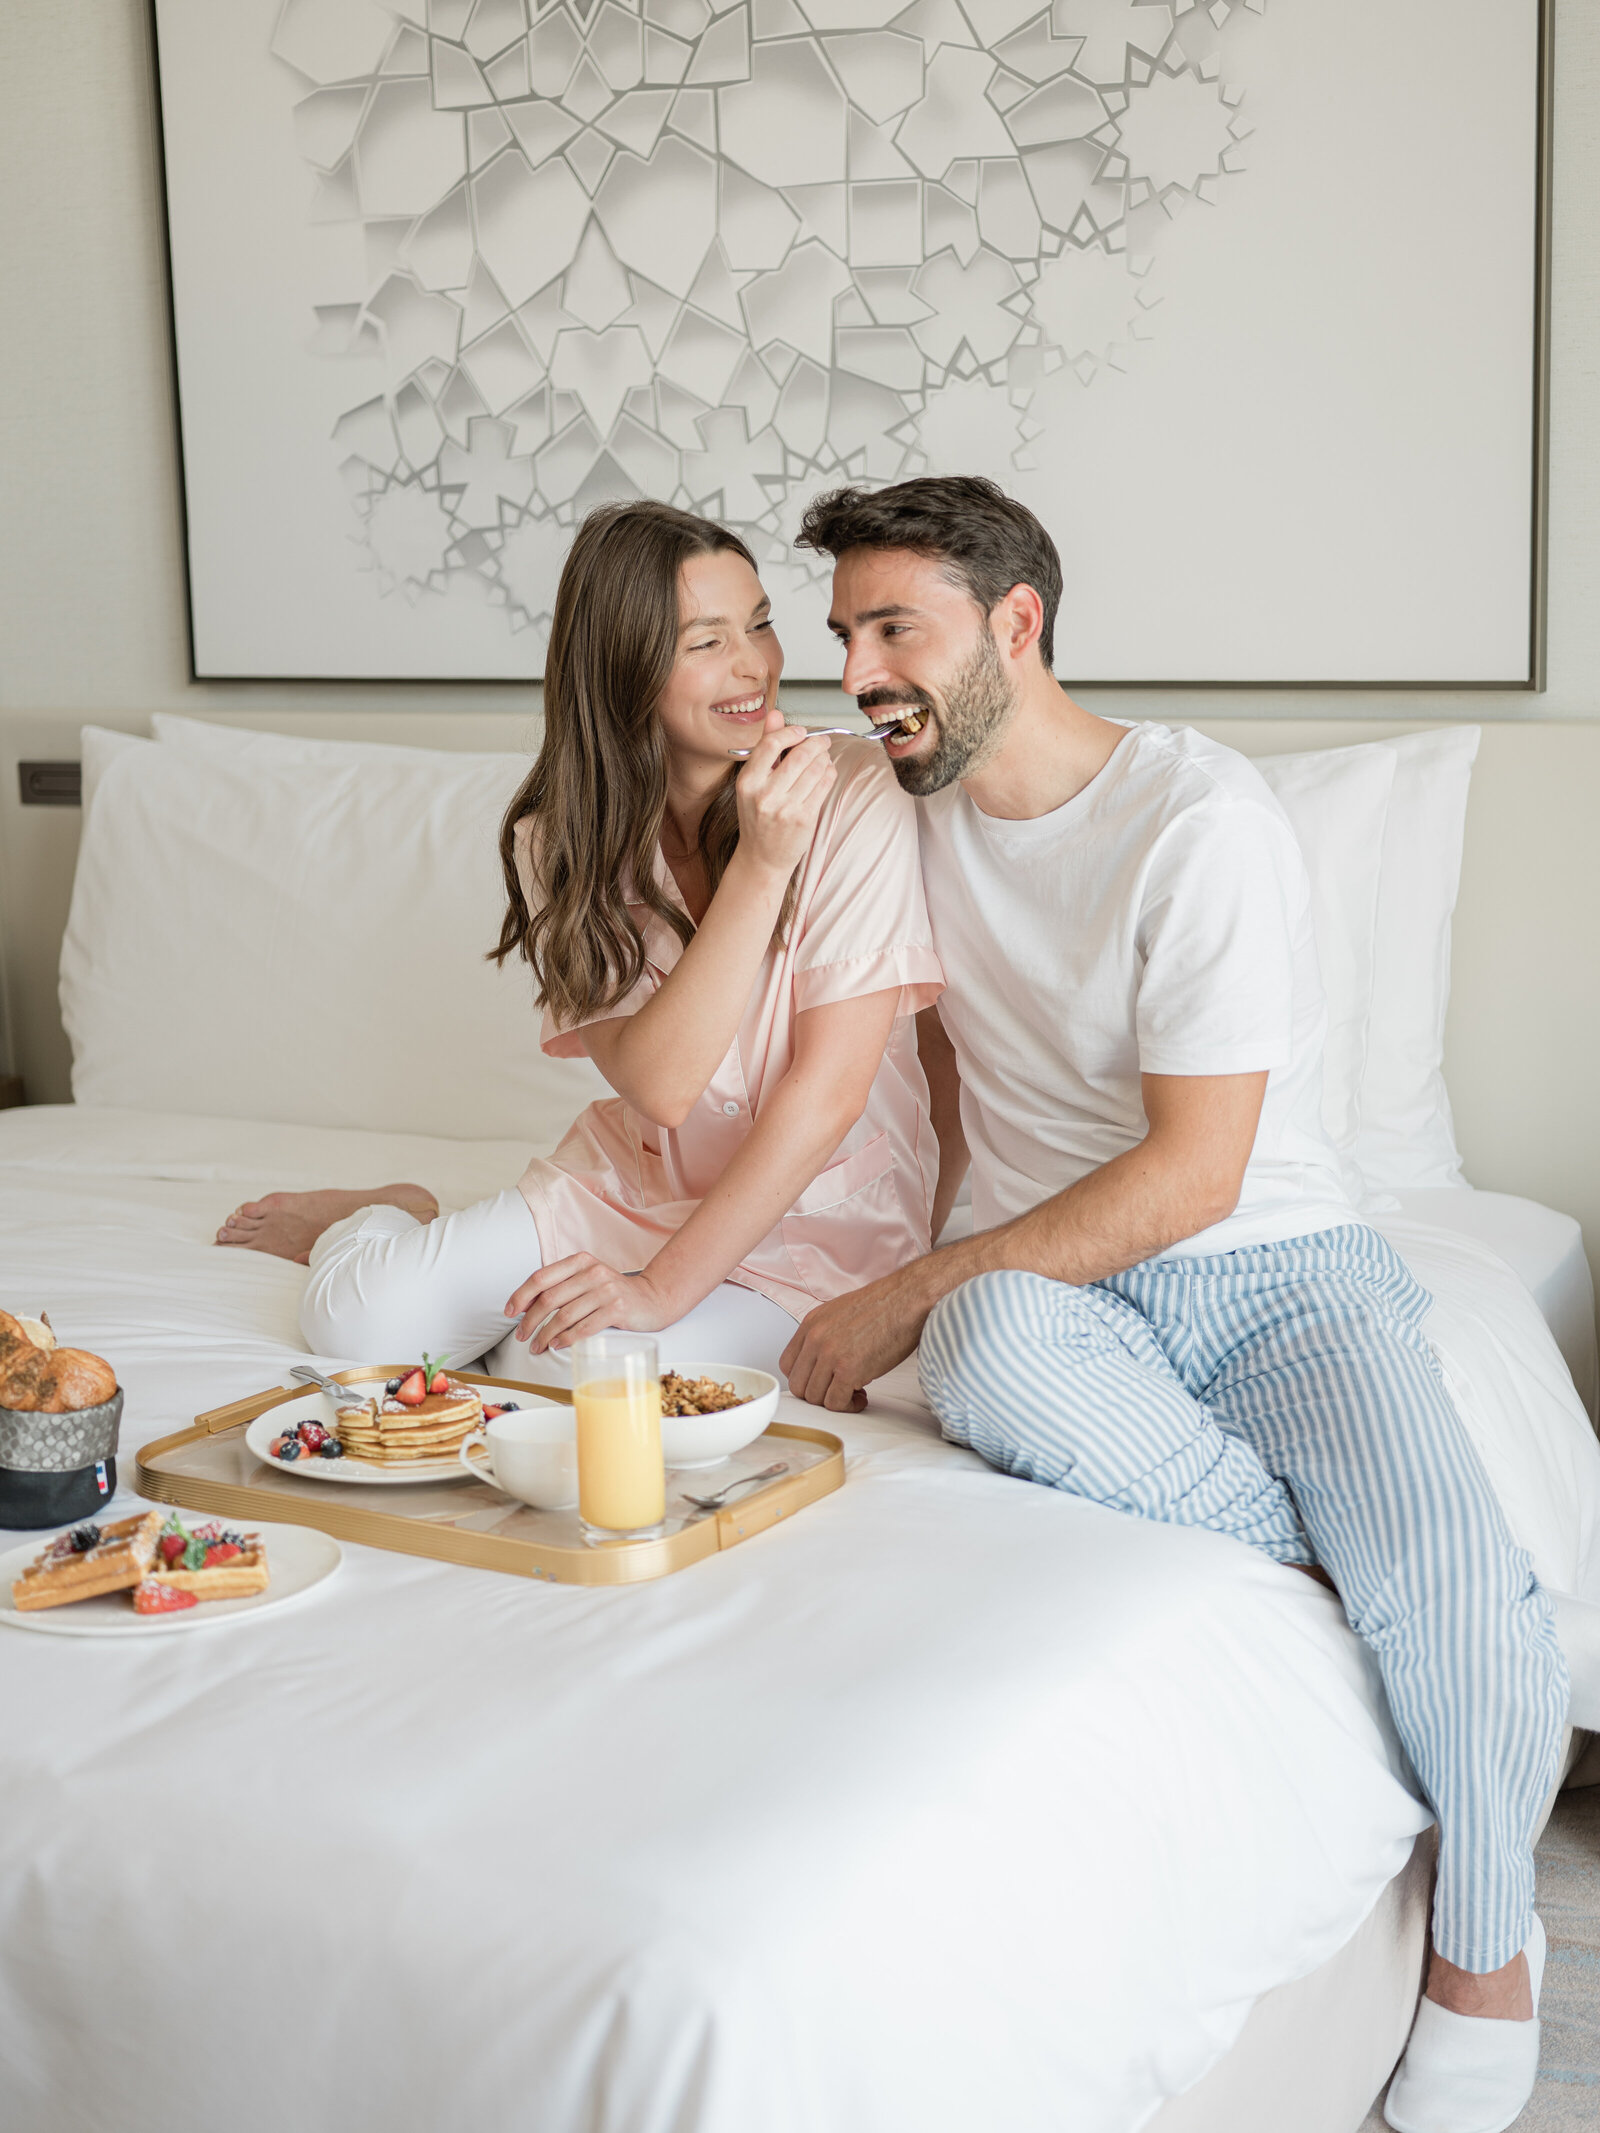 COUPLE BREAKFAST BEDROOM 2021 - Maddy Christina (11 sur 17)